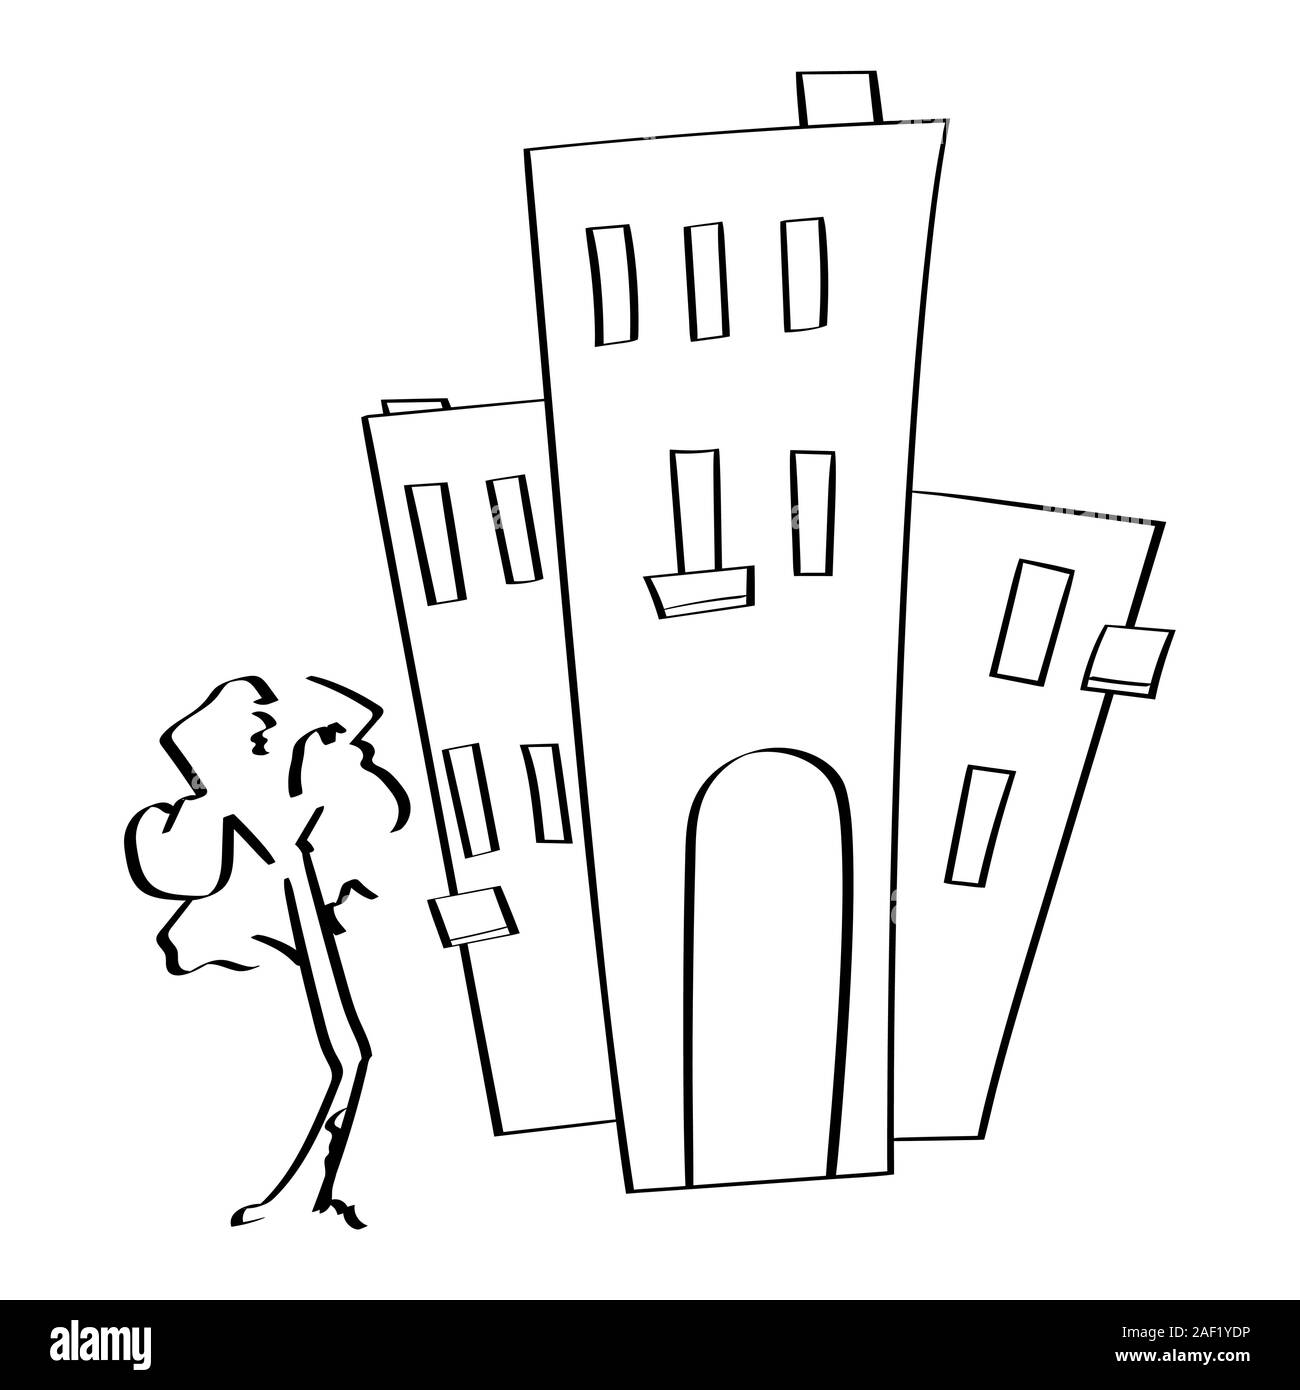 Tall buildings. Hand drawn doodle Stock Vector